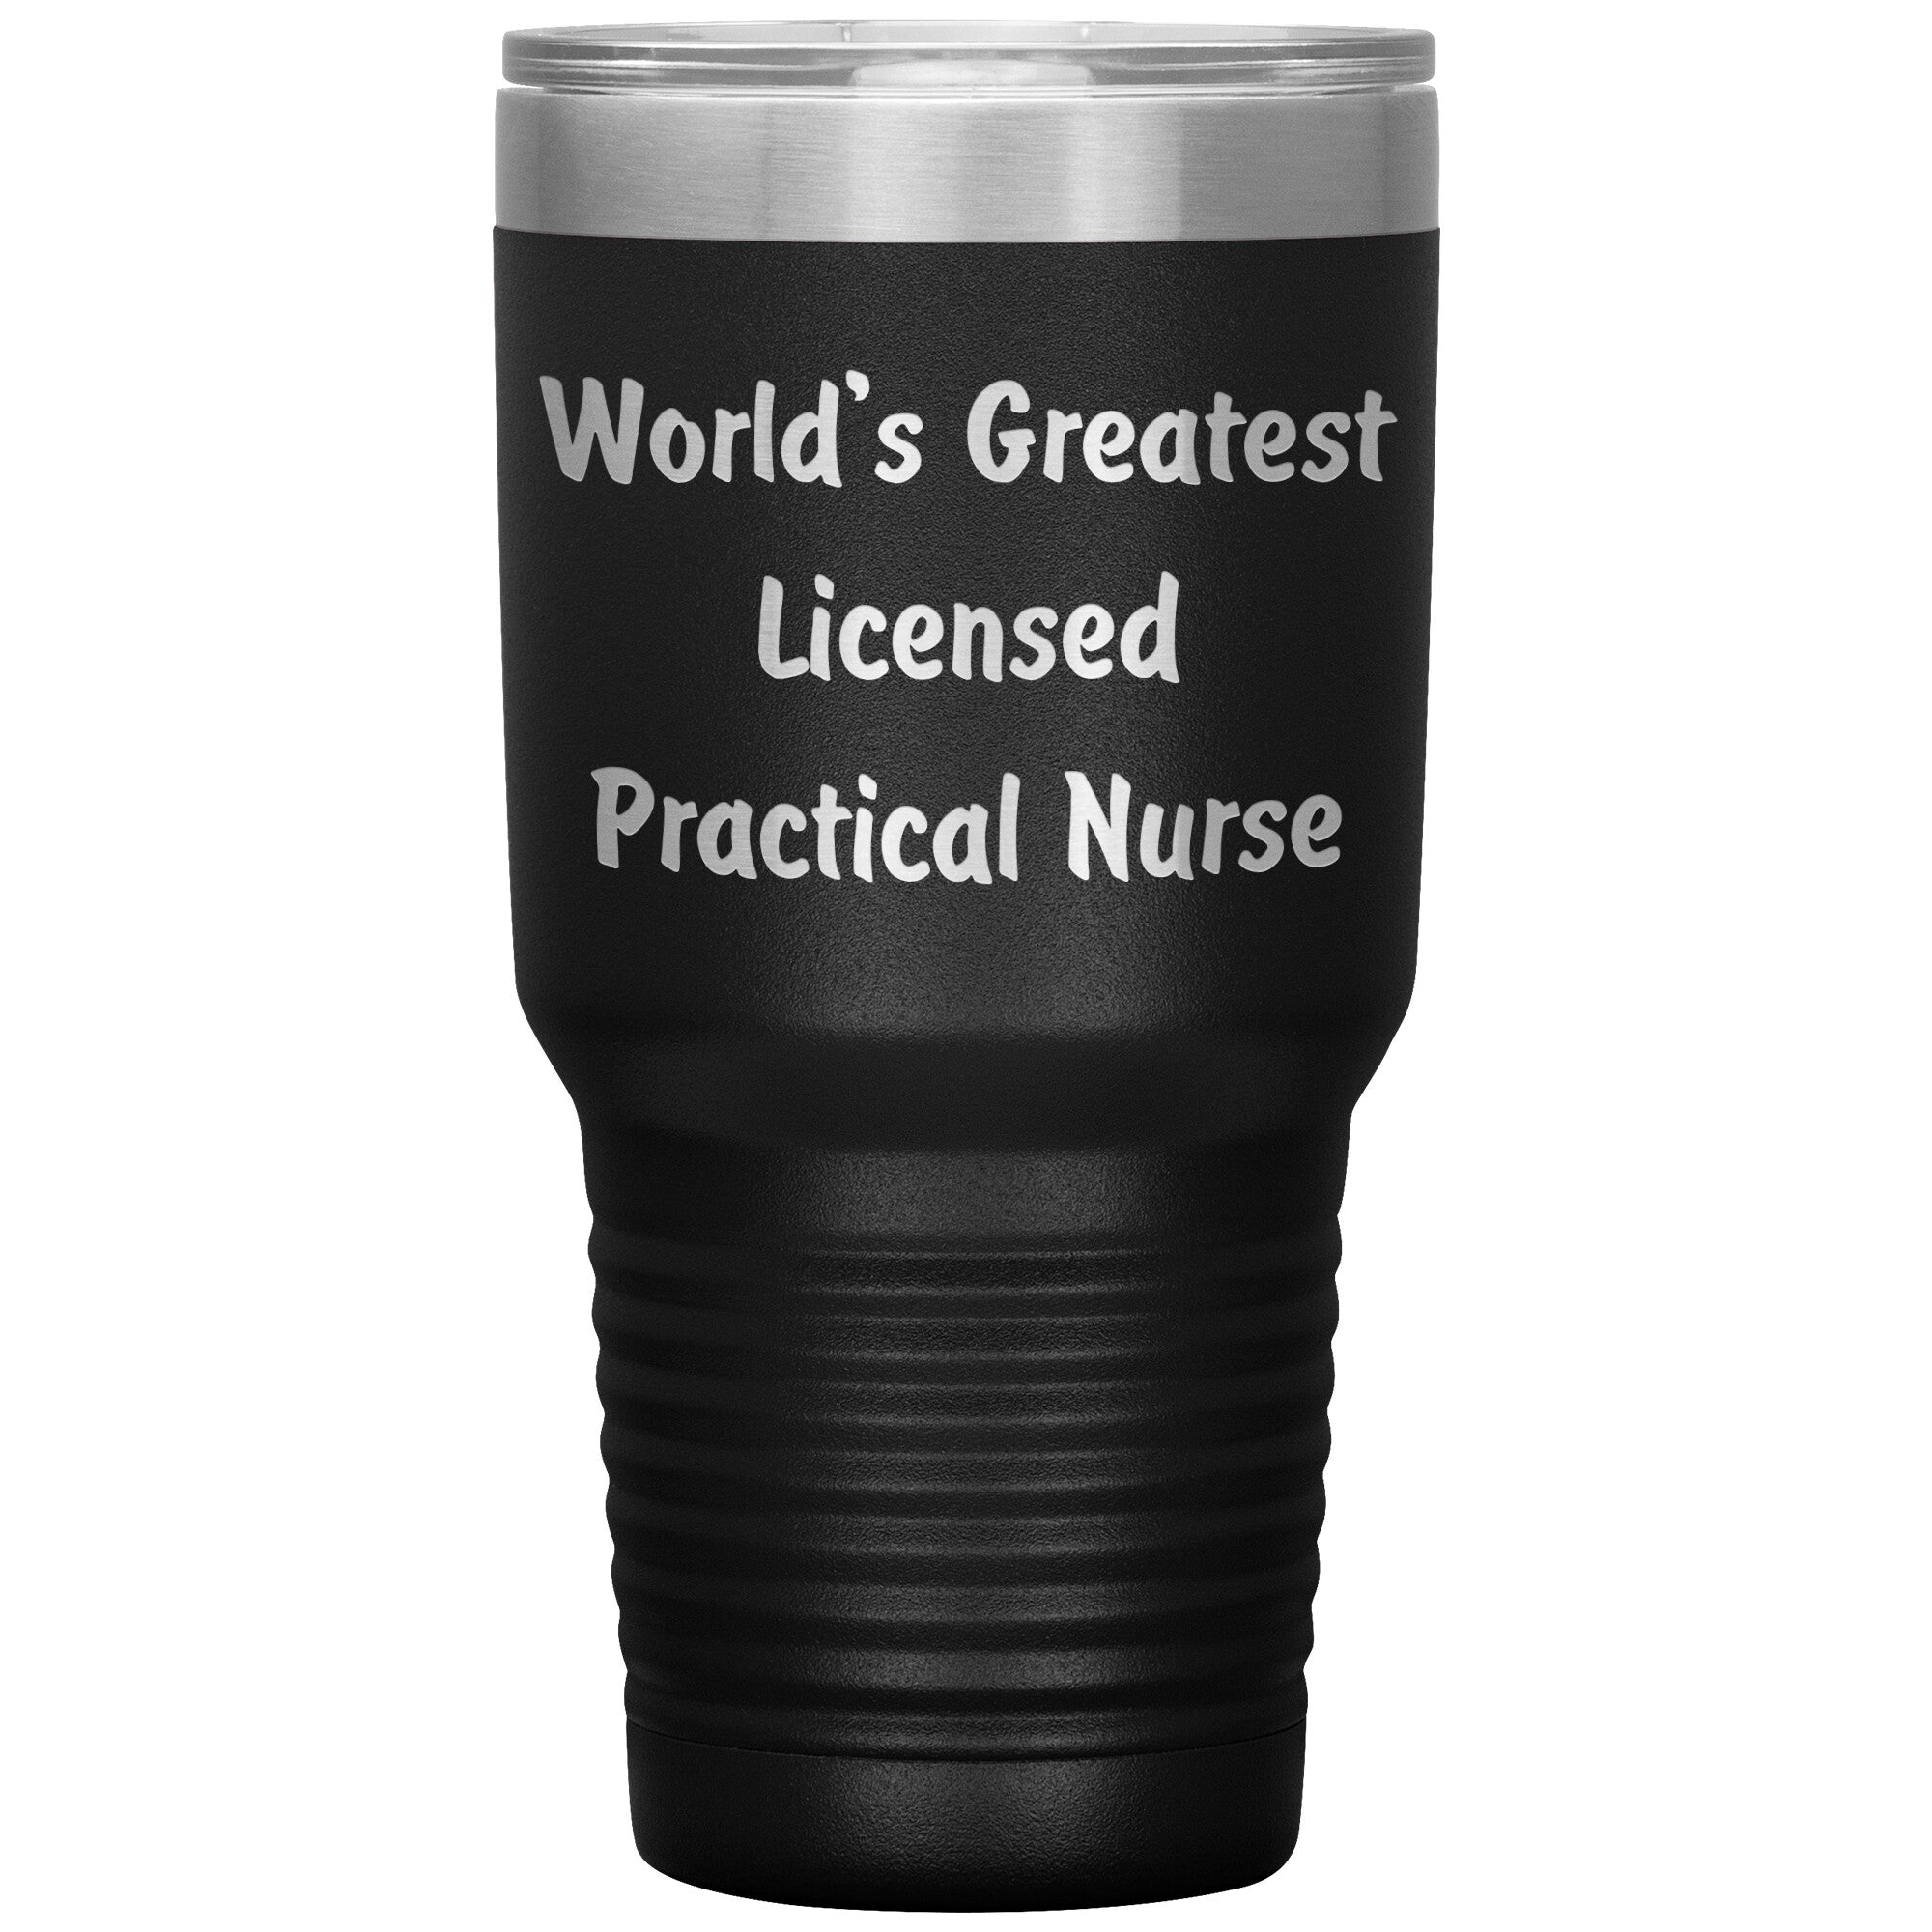 World's Greatest Licensed Practical Nurse - 30oz Insulated Tumbler